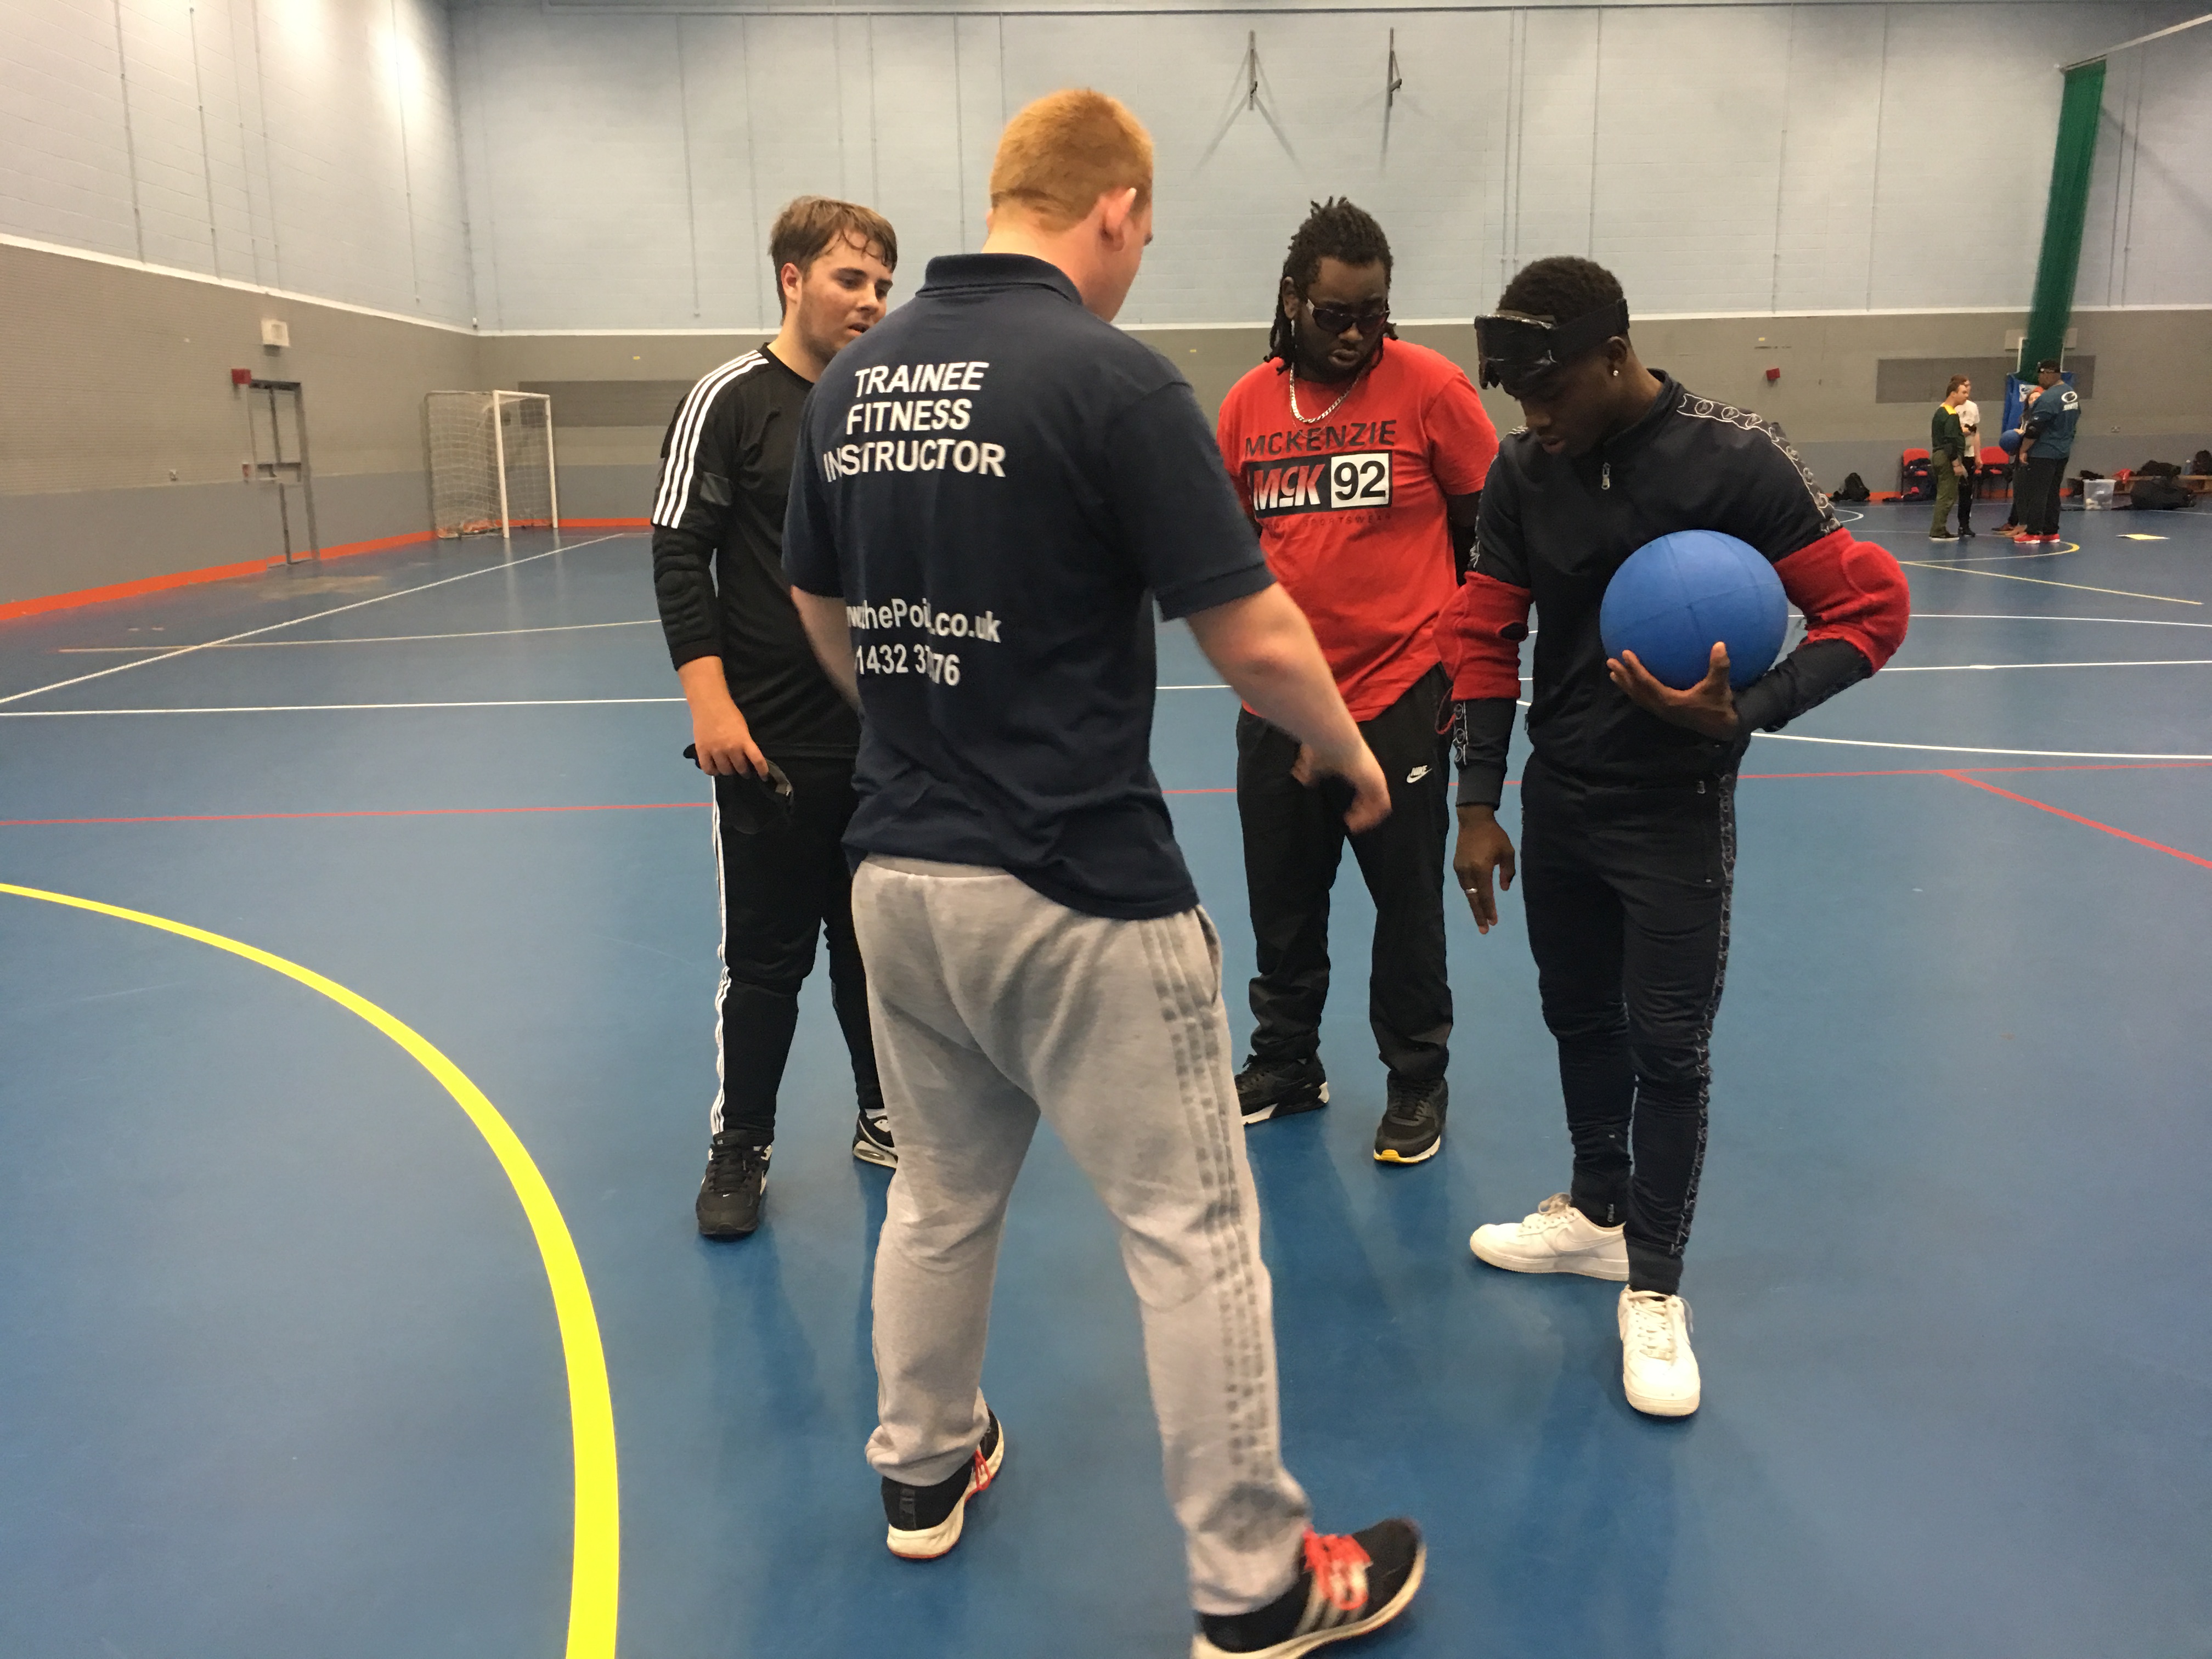 a male student instructor delivers a coaching session to 3 male students